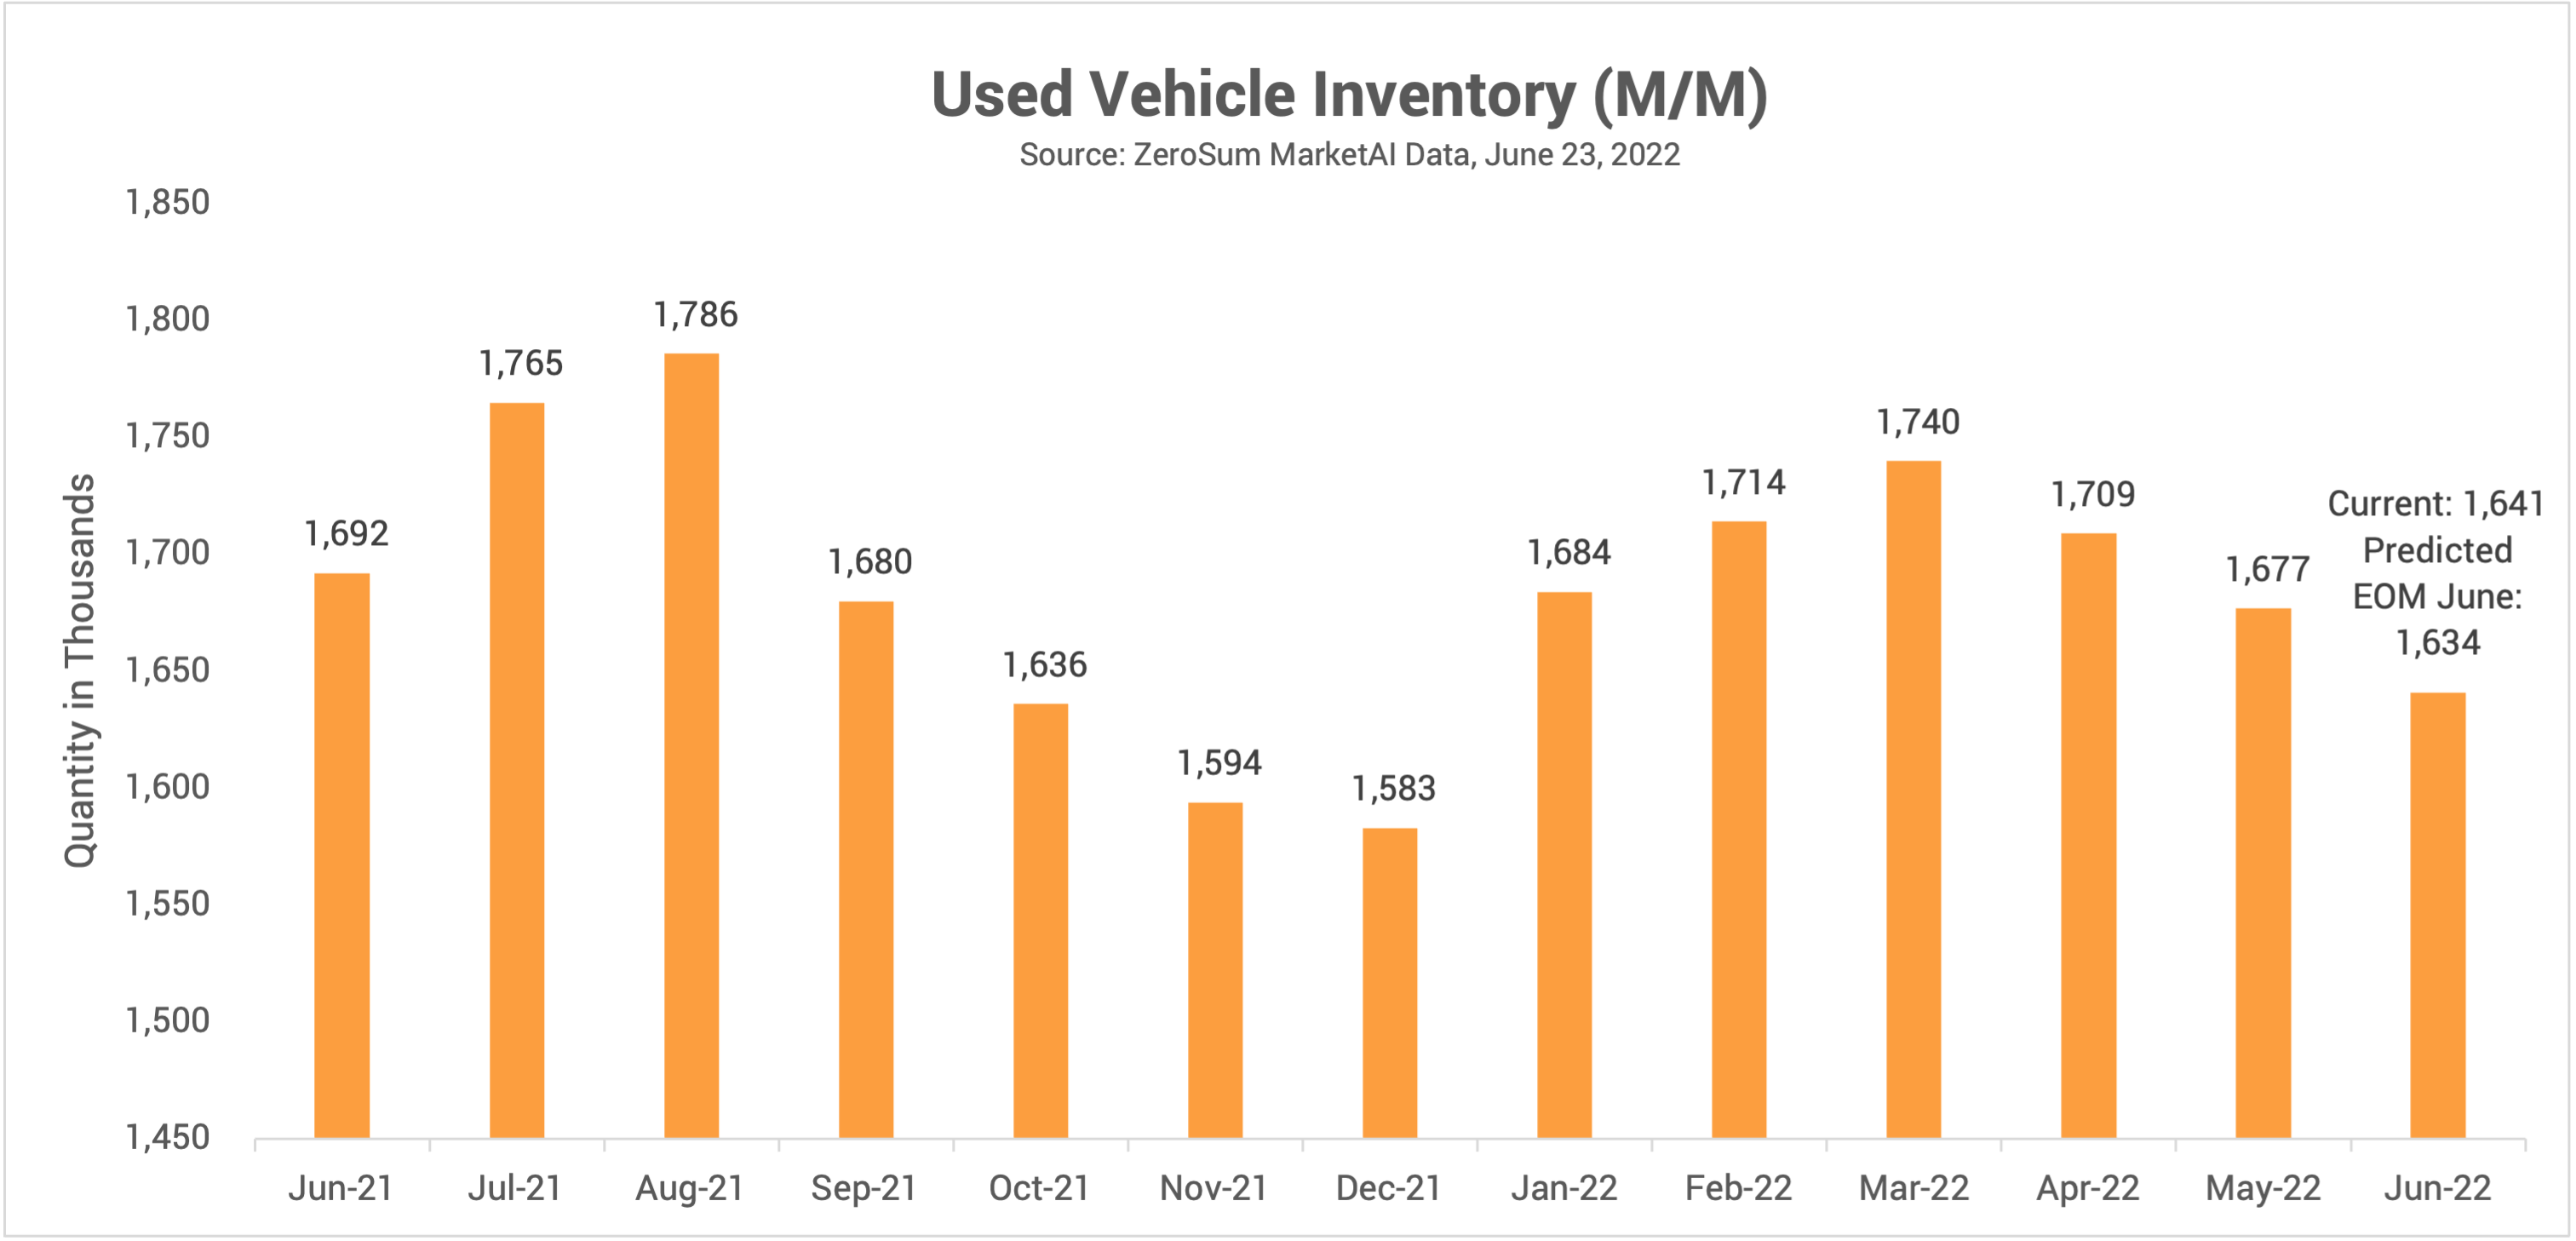 Used Vehicle Inventory Trend